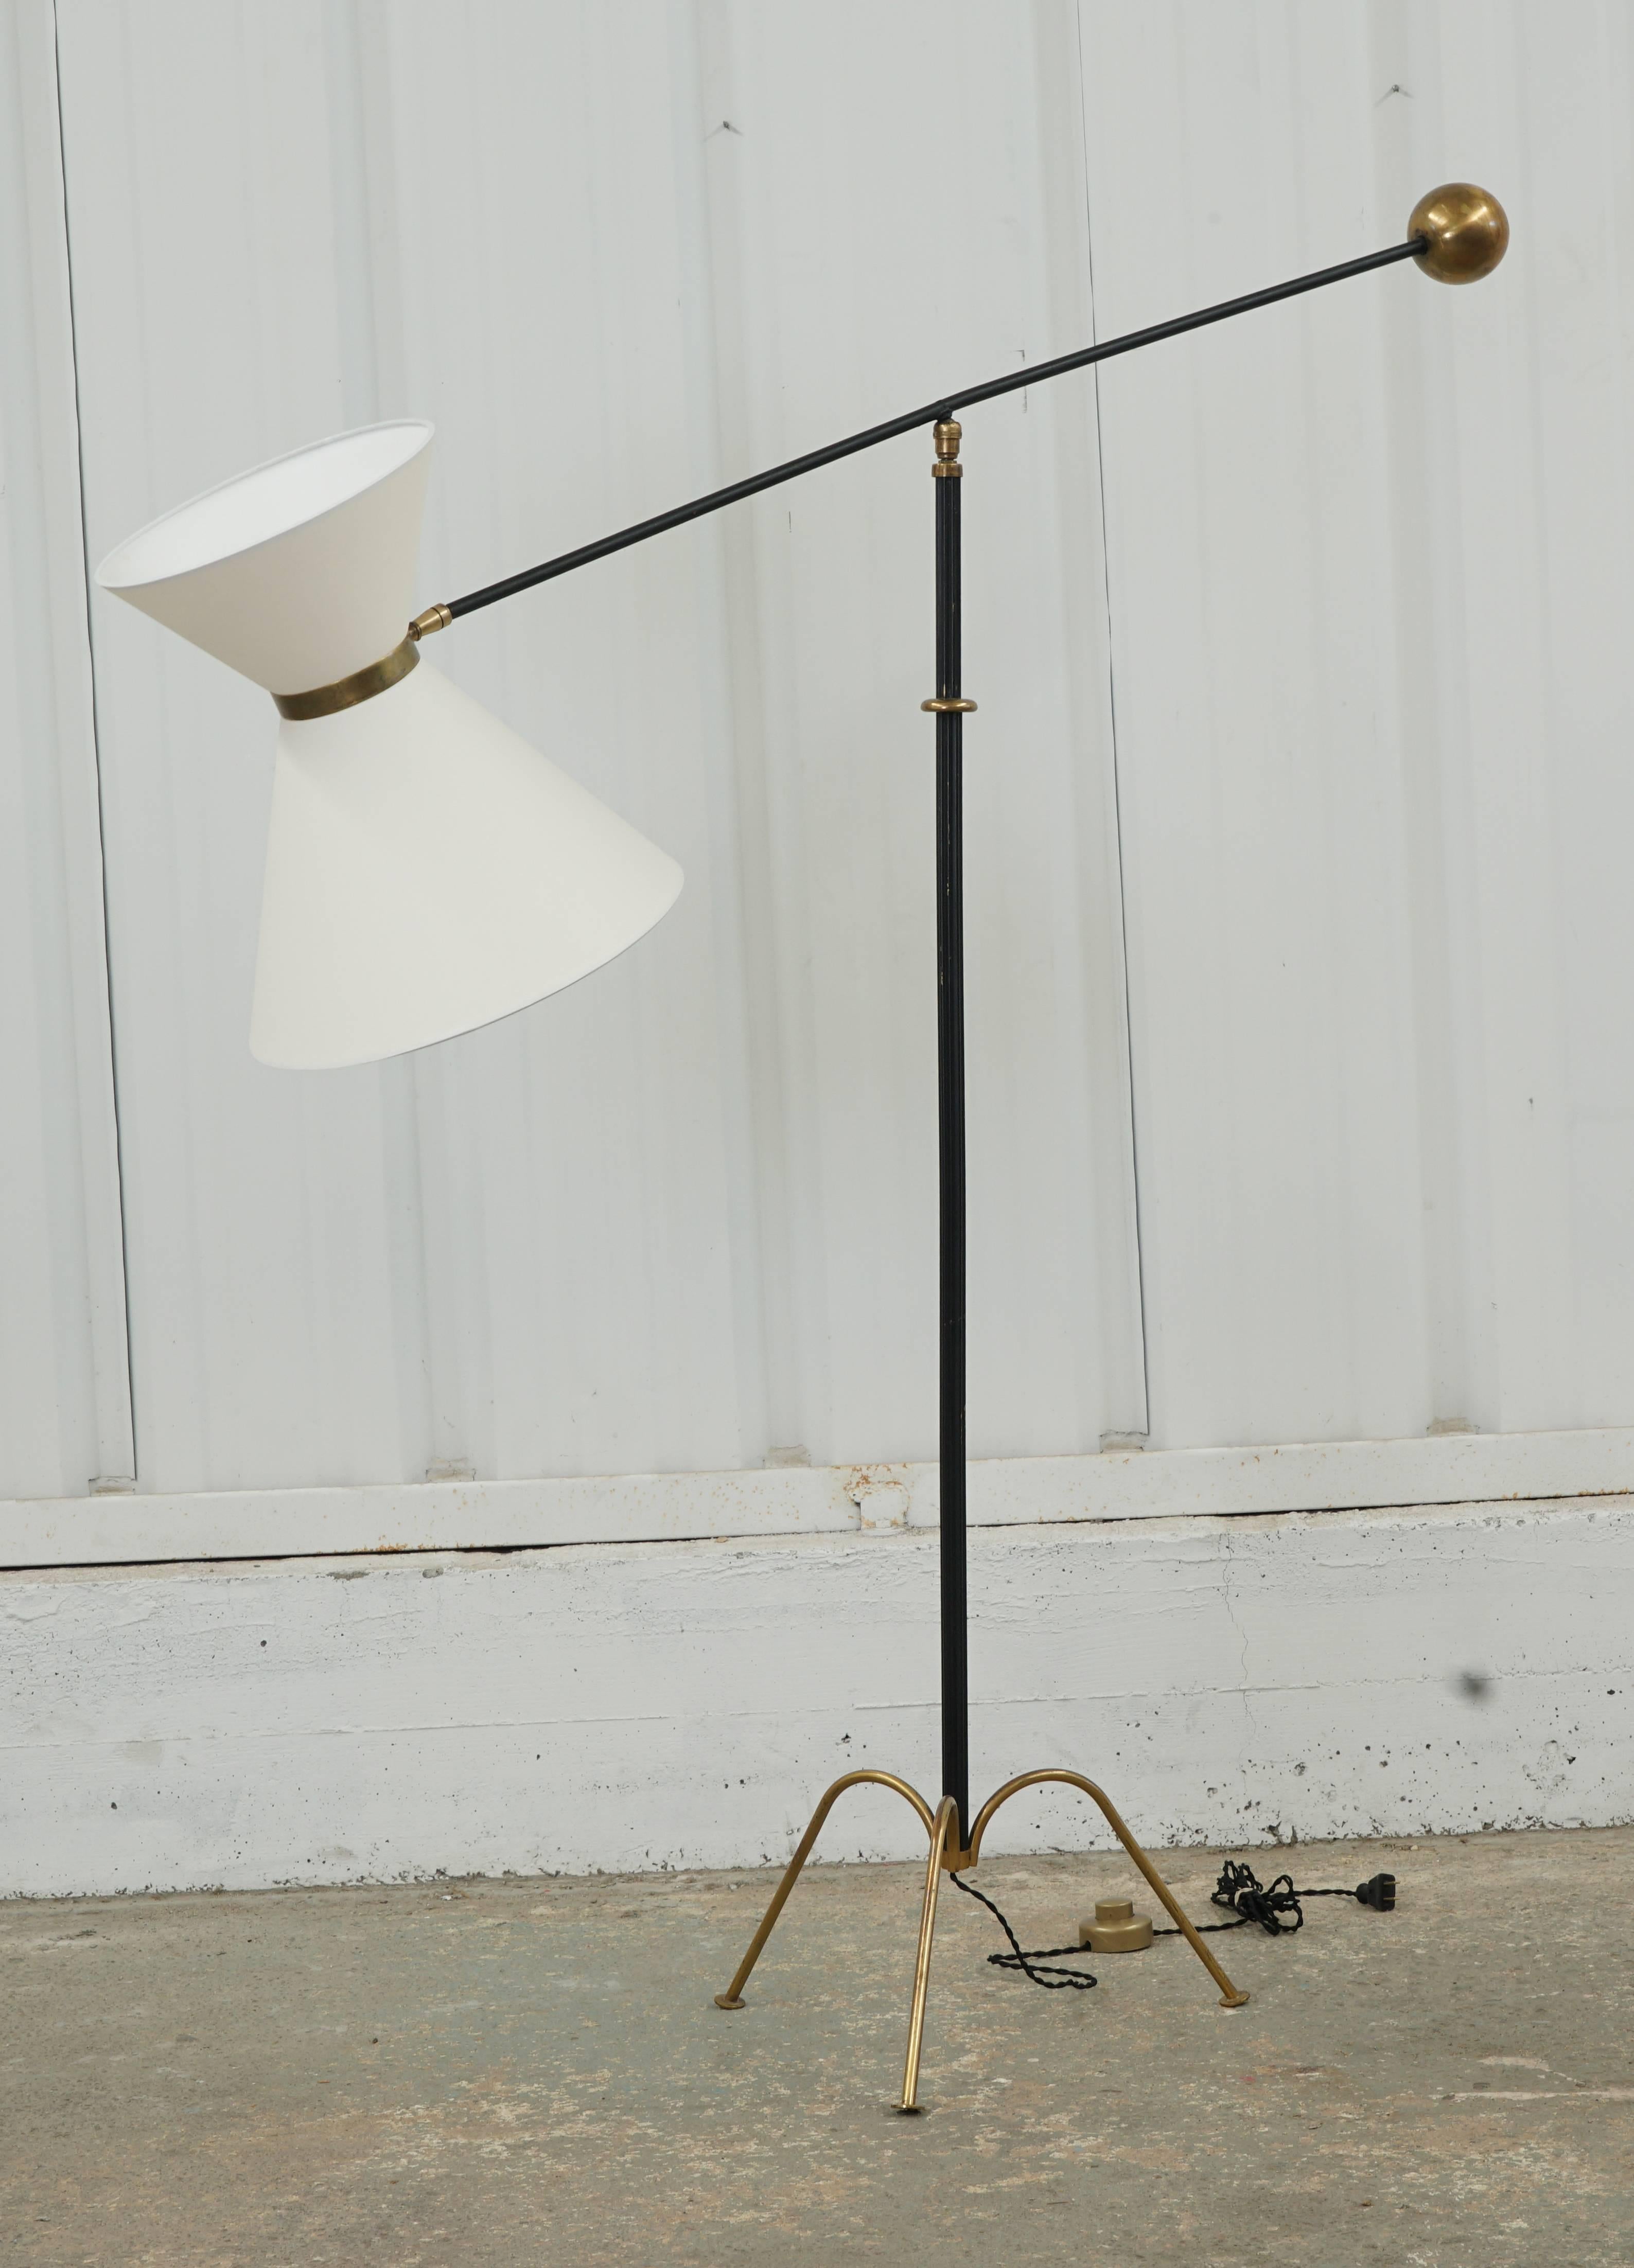 Iron reading lamp with paper shade and brass details including ball counterweight, shade band and three-legged base. Shade articulates as well. (See pics).